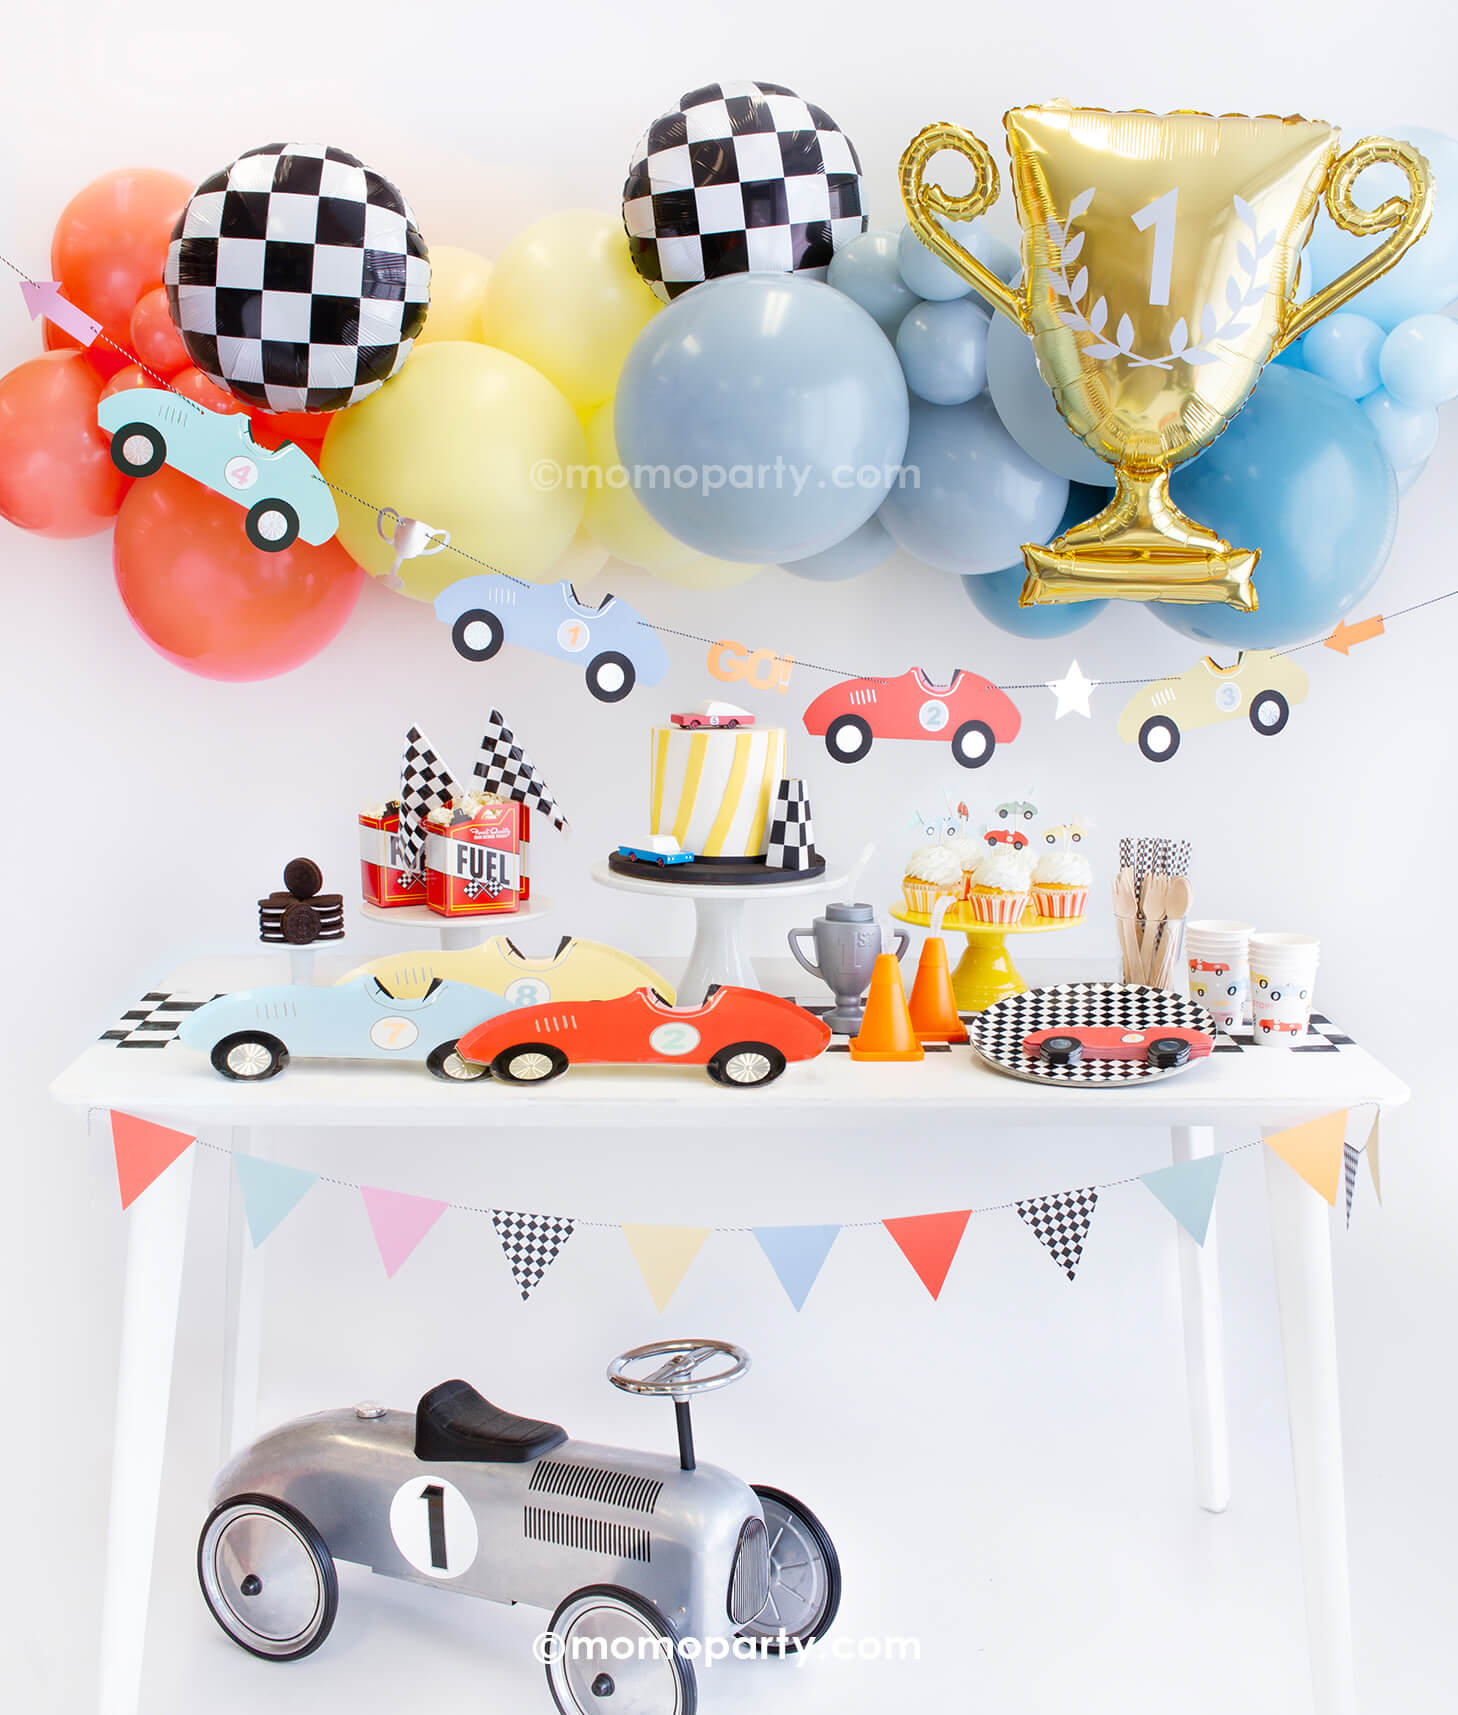 Momo Party Race Car Box featuring Meri Meri race car paper plates, race car shape napkins, race car graphic party paper cups, checkered round side plates, race car cupcake kit, candy car as cake topper, Fuel treat favor box with popcorns as tableware, colorful balloon cloud, race car party garland in pastel colors, checkerboard foil balloons and a trophy shaped foil balloon as decorations, all makes a great inspo for kid's modern race car party or a "Fast One" first birthday celebration.